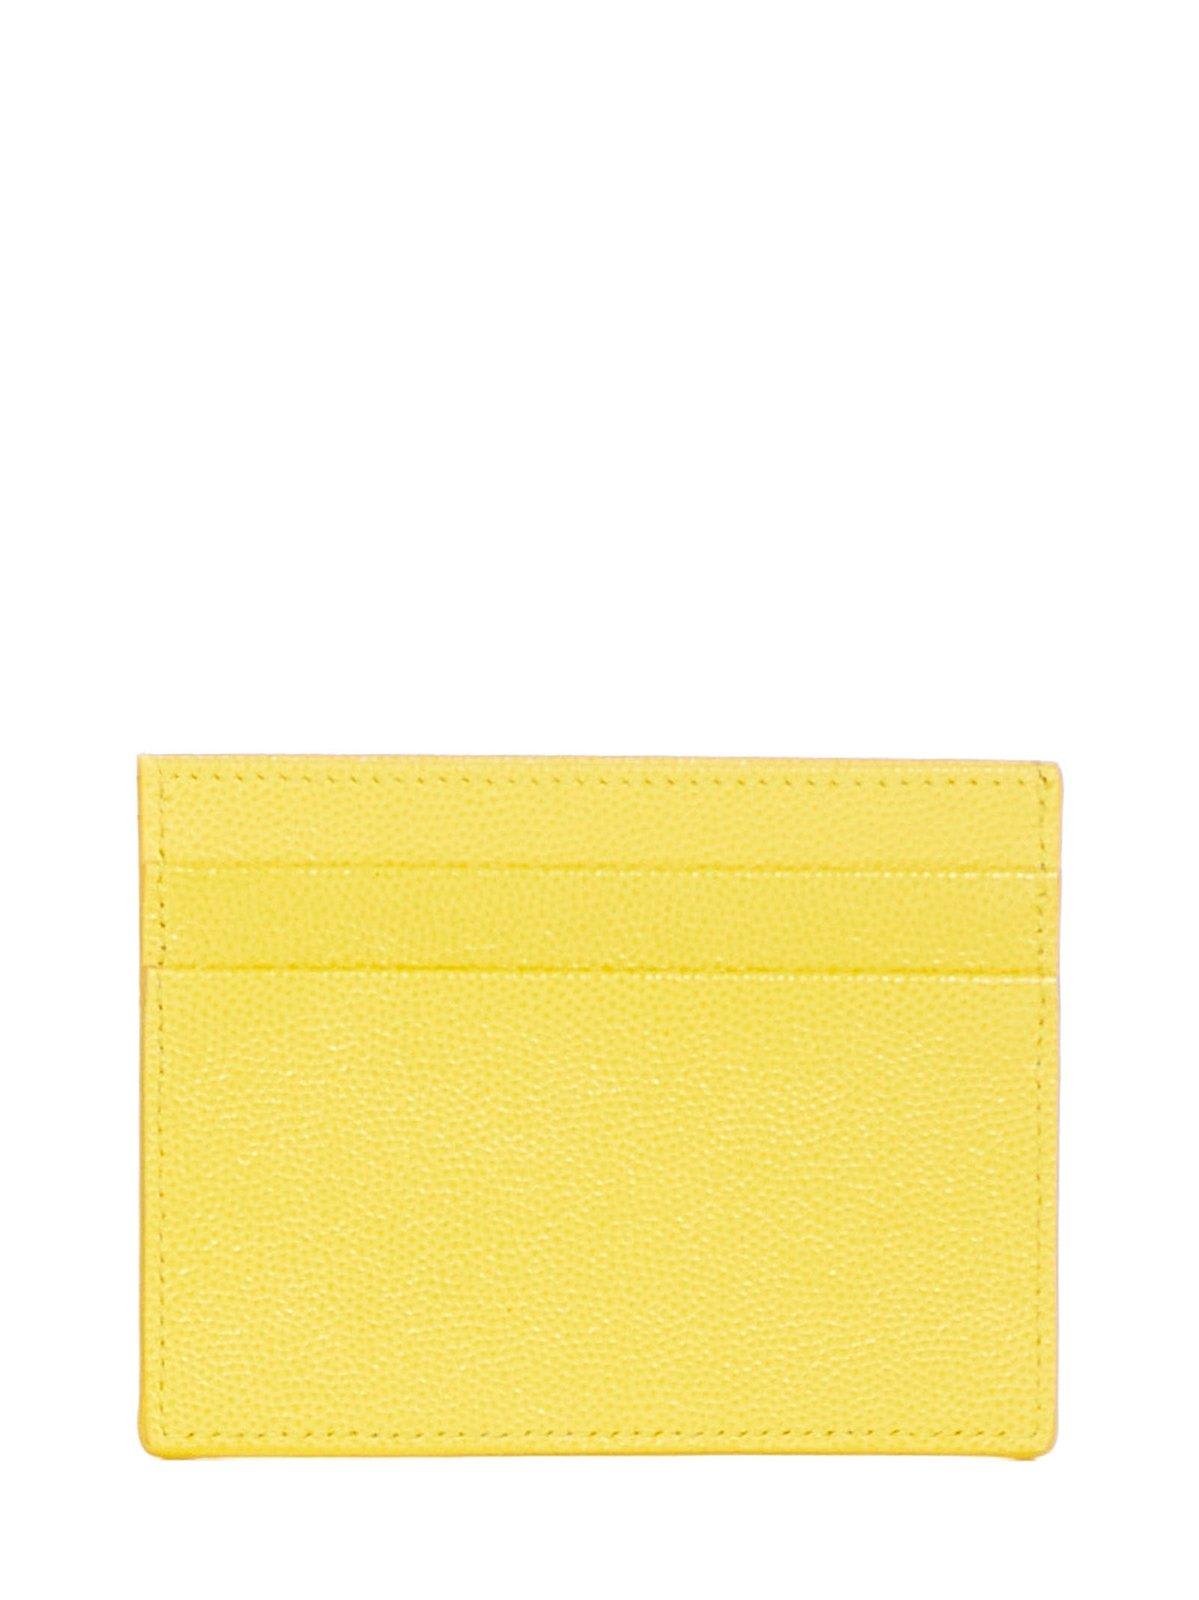 Shop Palm Angels Logo Printed Cardholder In Yellow